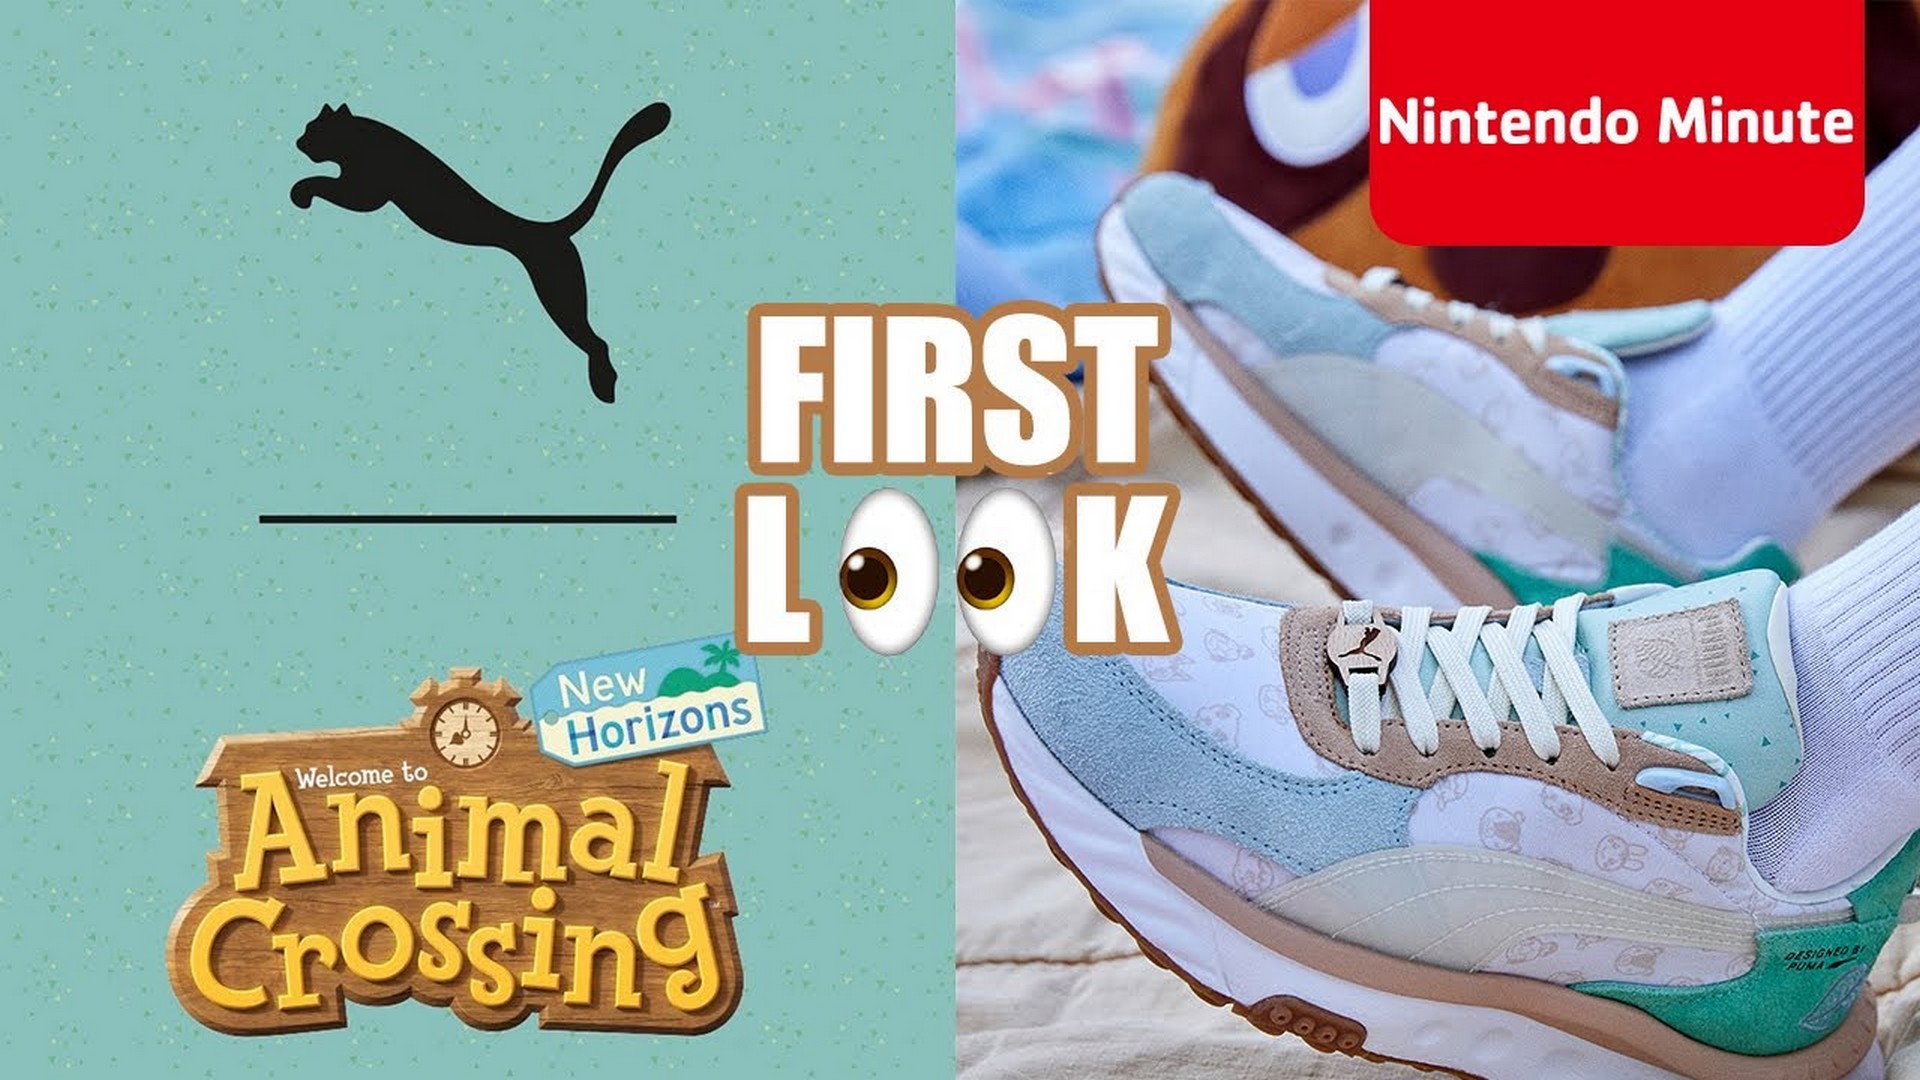 GAME ON. The Puma X Animal Crossing: New Horizons Collection Is Coming